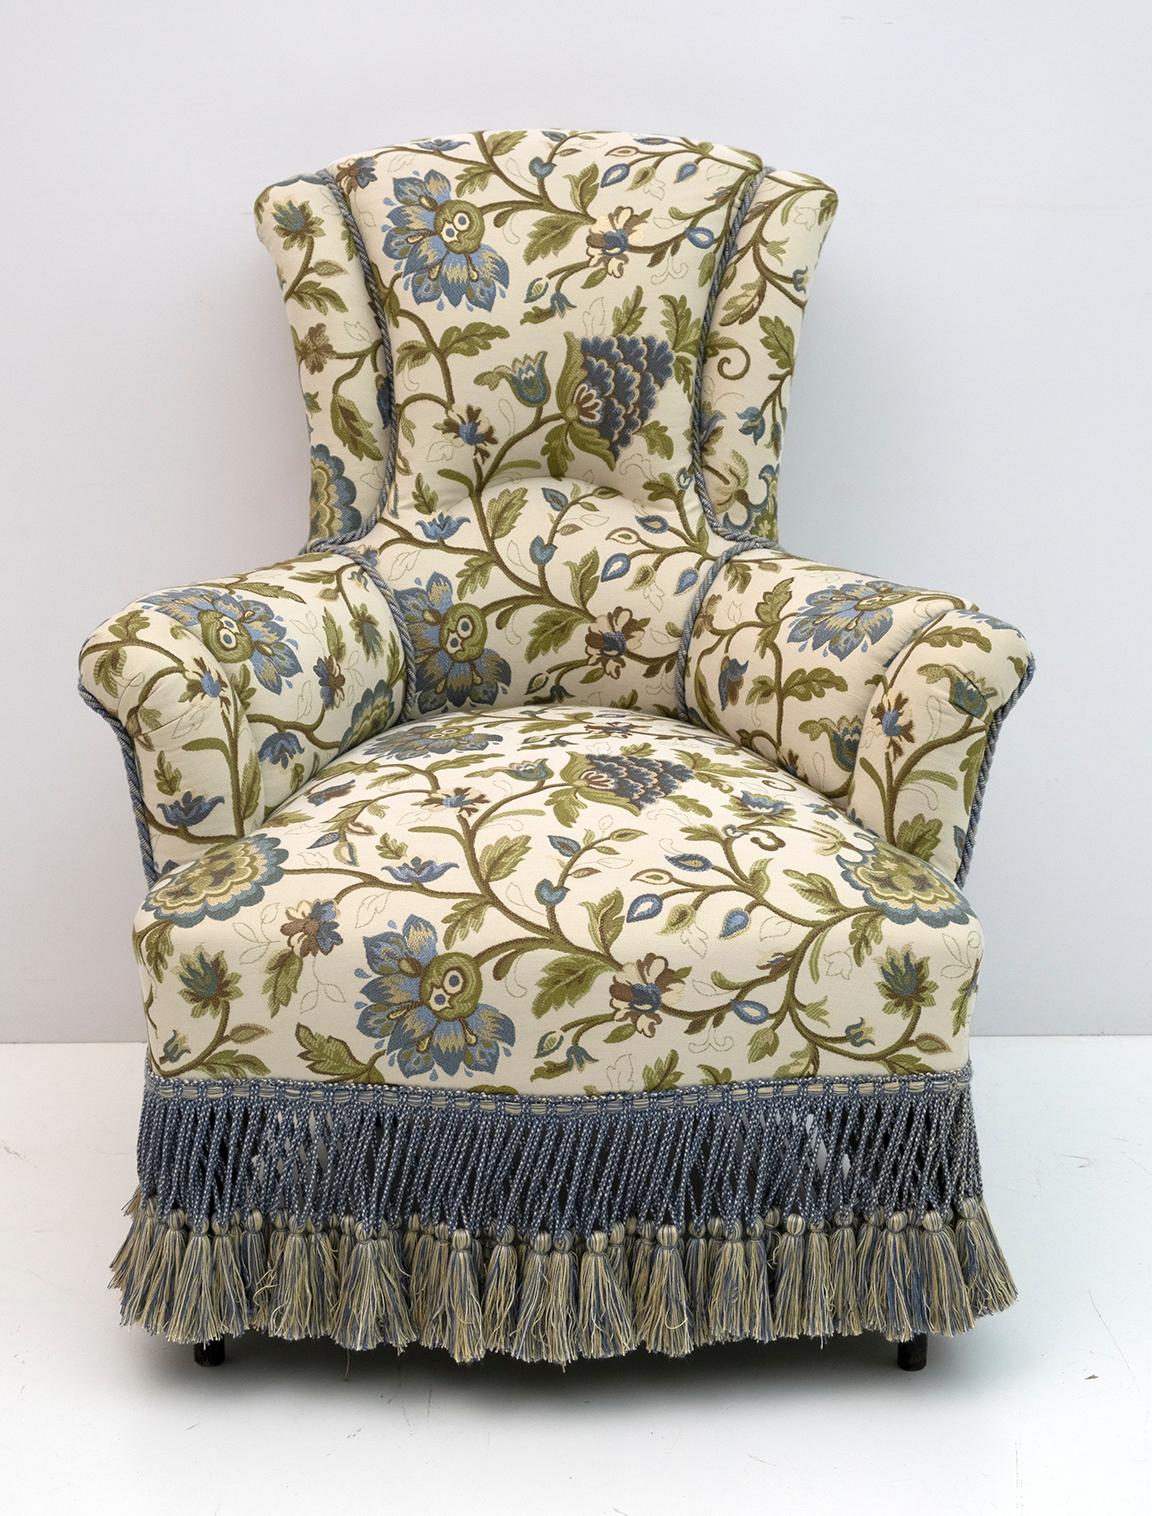 19th century armchair, Napoleon III period. The armchair has been restored and the upholstery has been replaced with a beautiful Italian brocade. France, 1870.